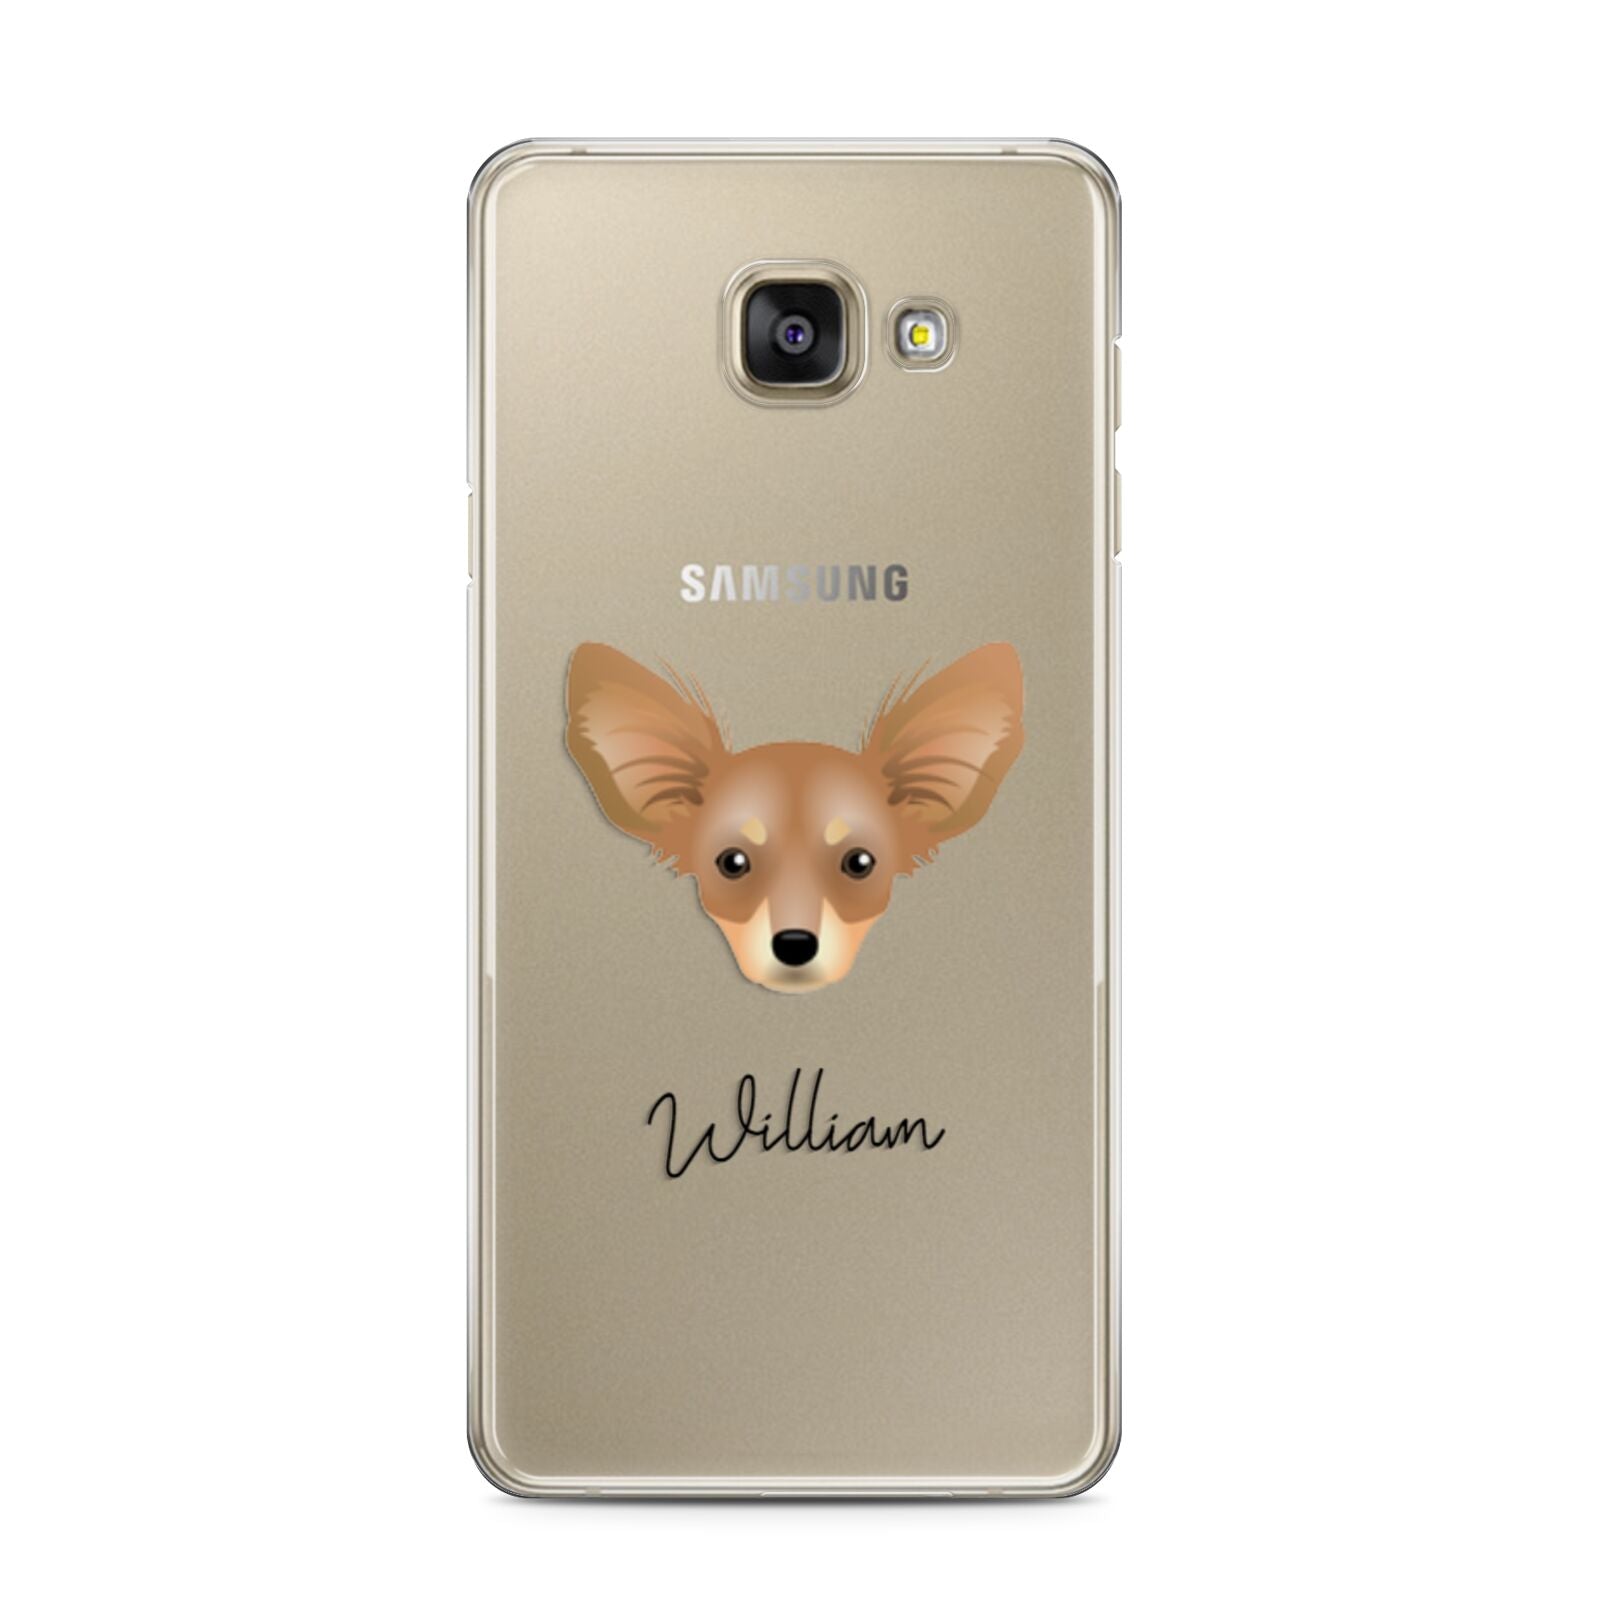 Russian Toy Personalised Samsung Galaxy A3 2016 Case on gold phone